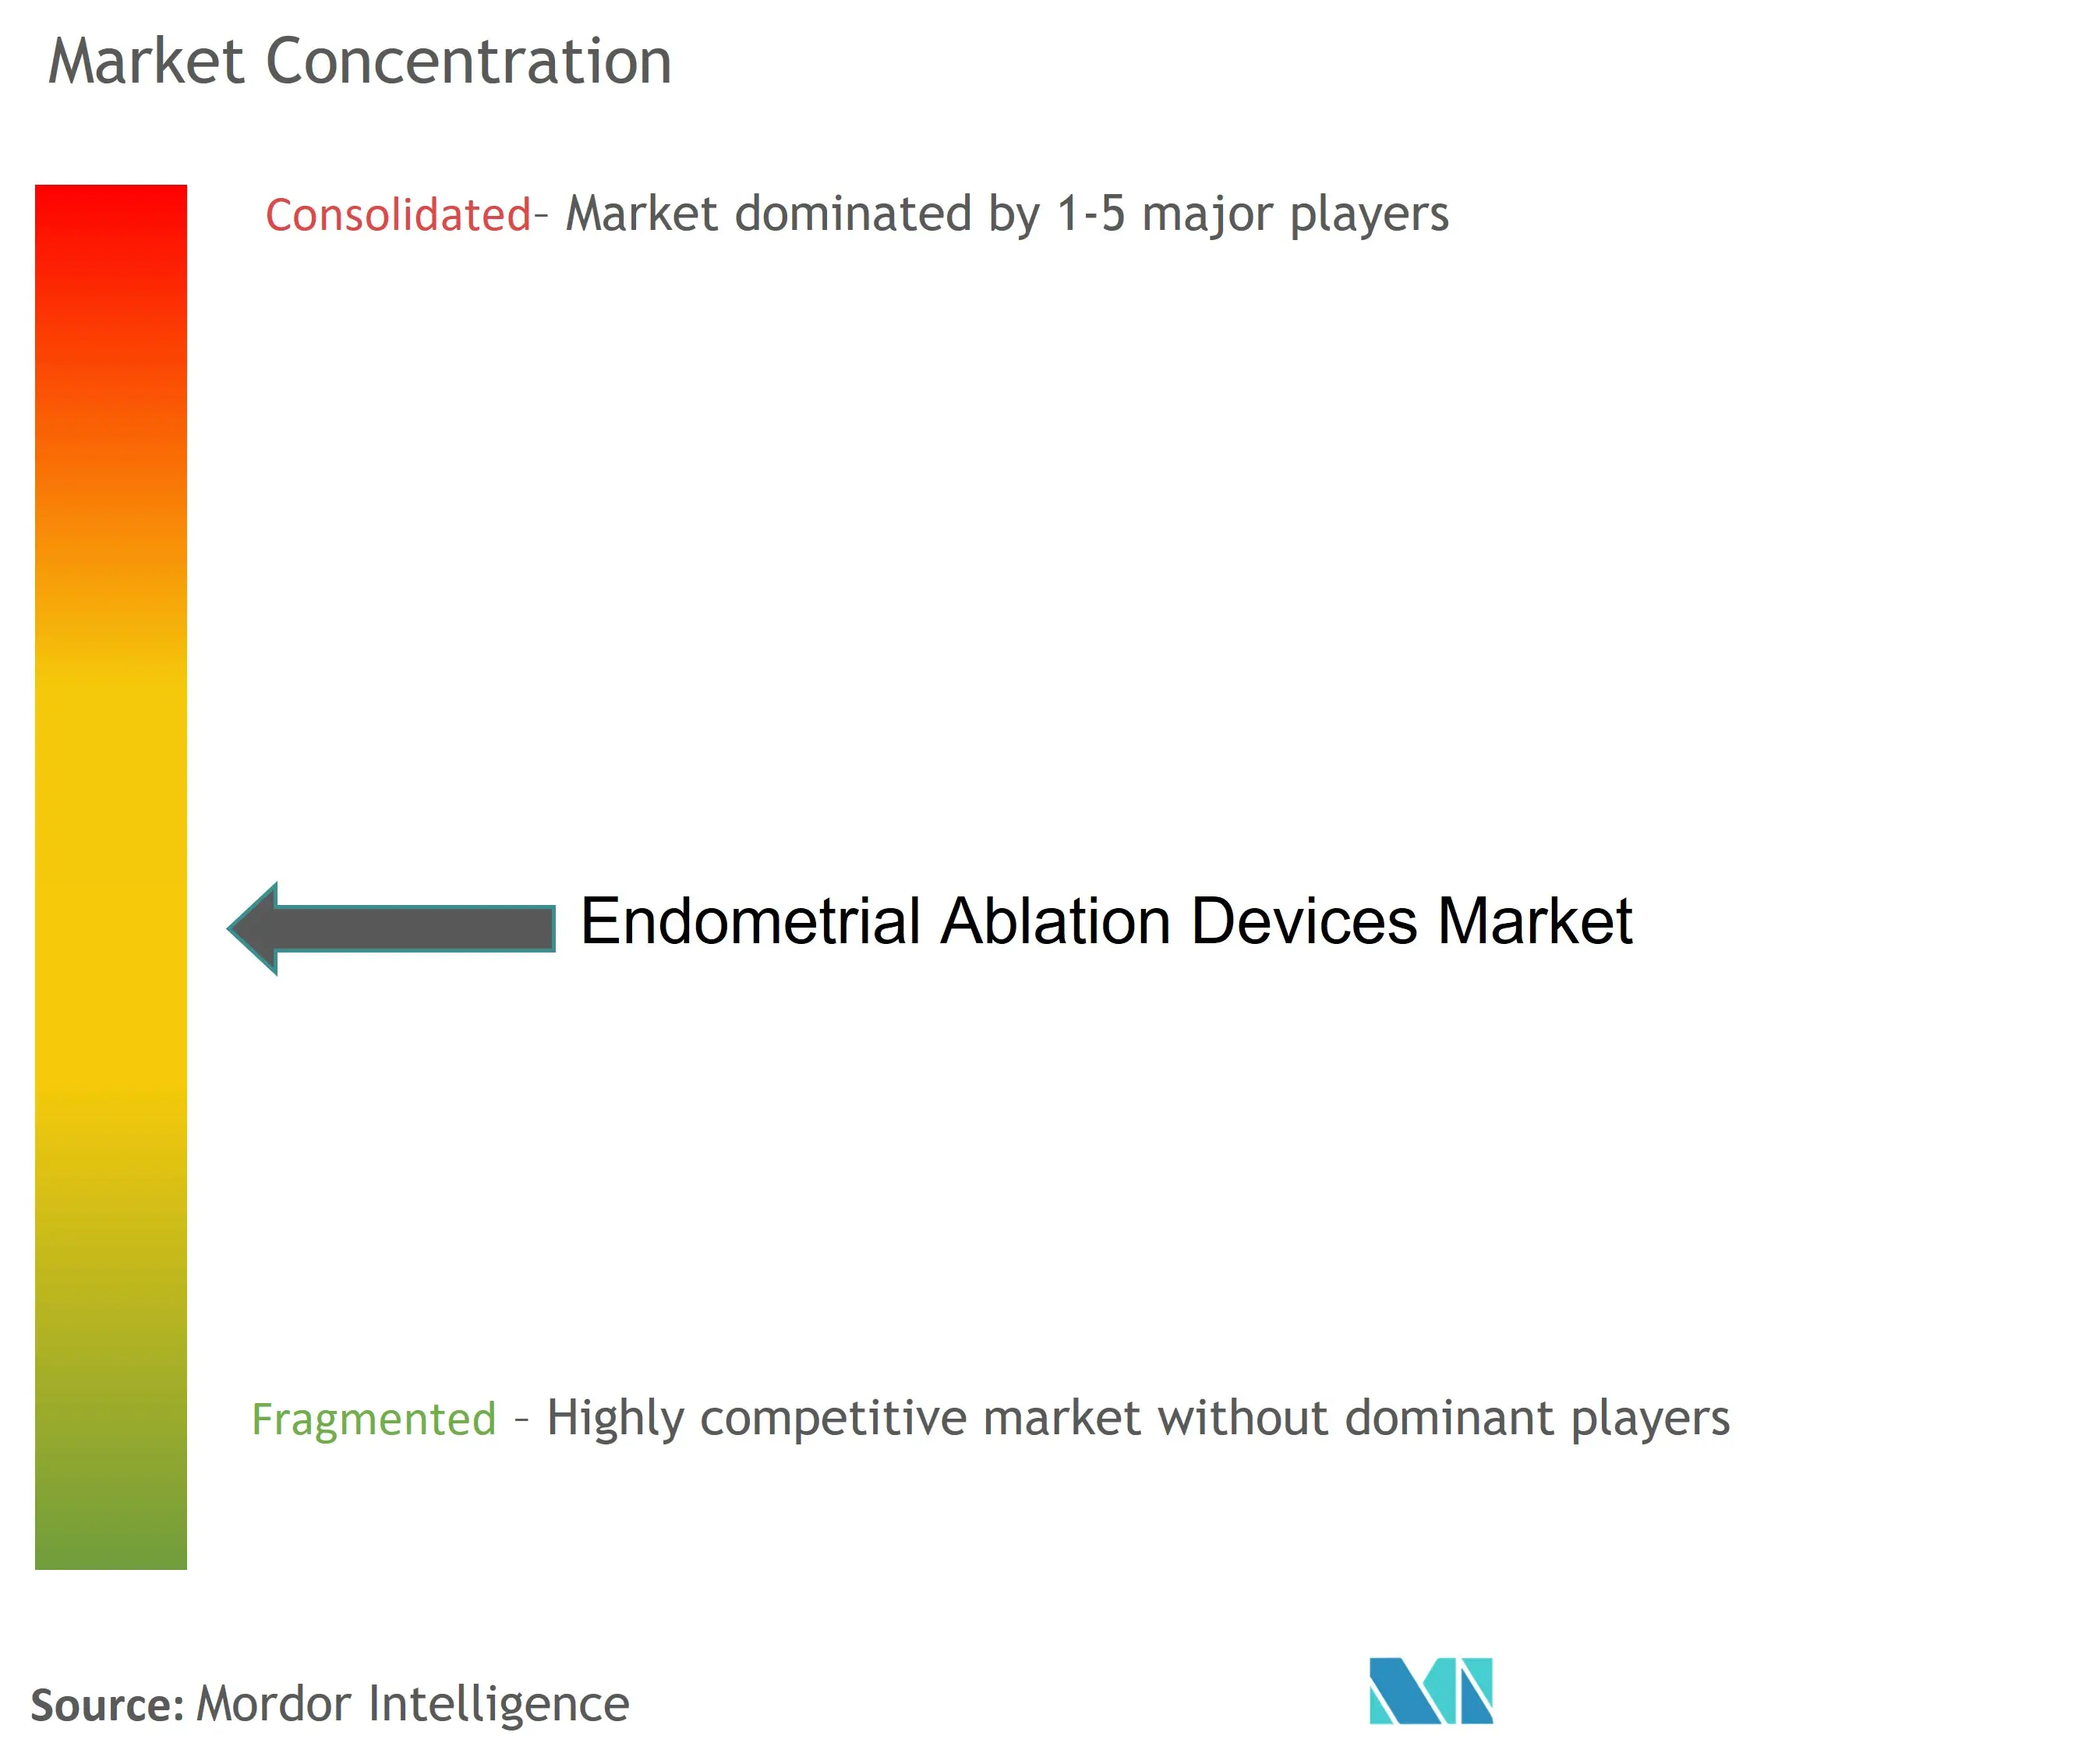 Endometrial Ablation Devices Market Concentration